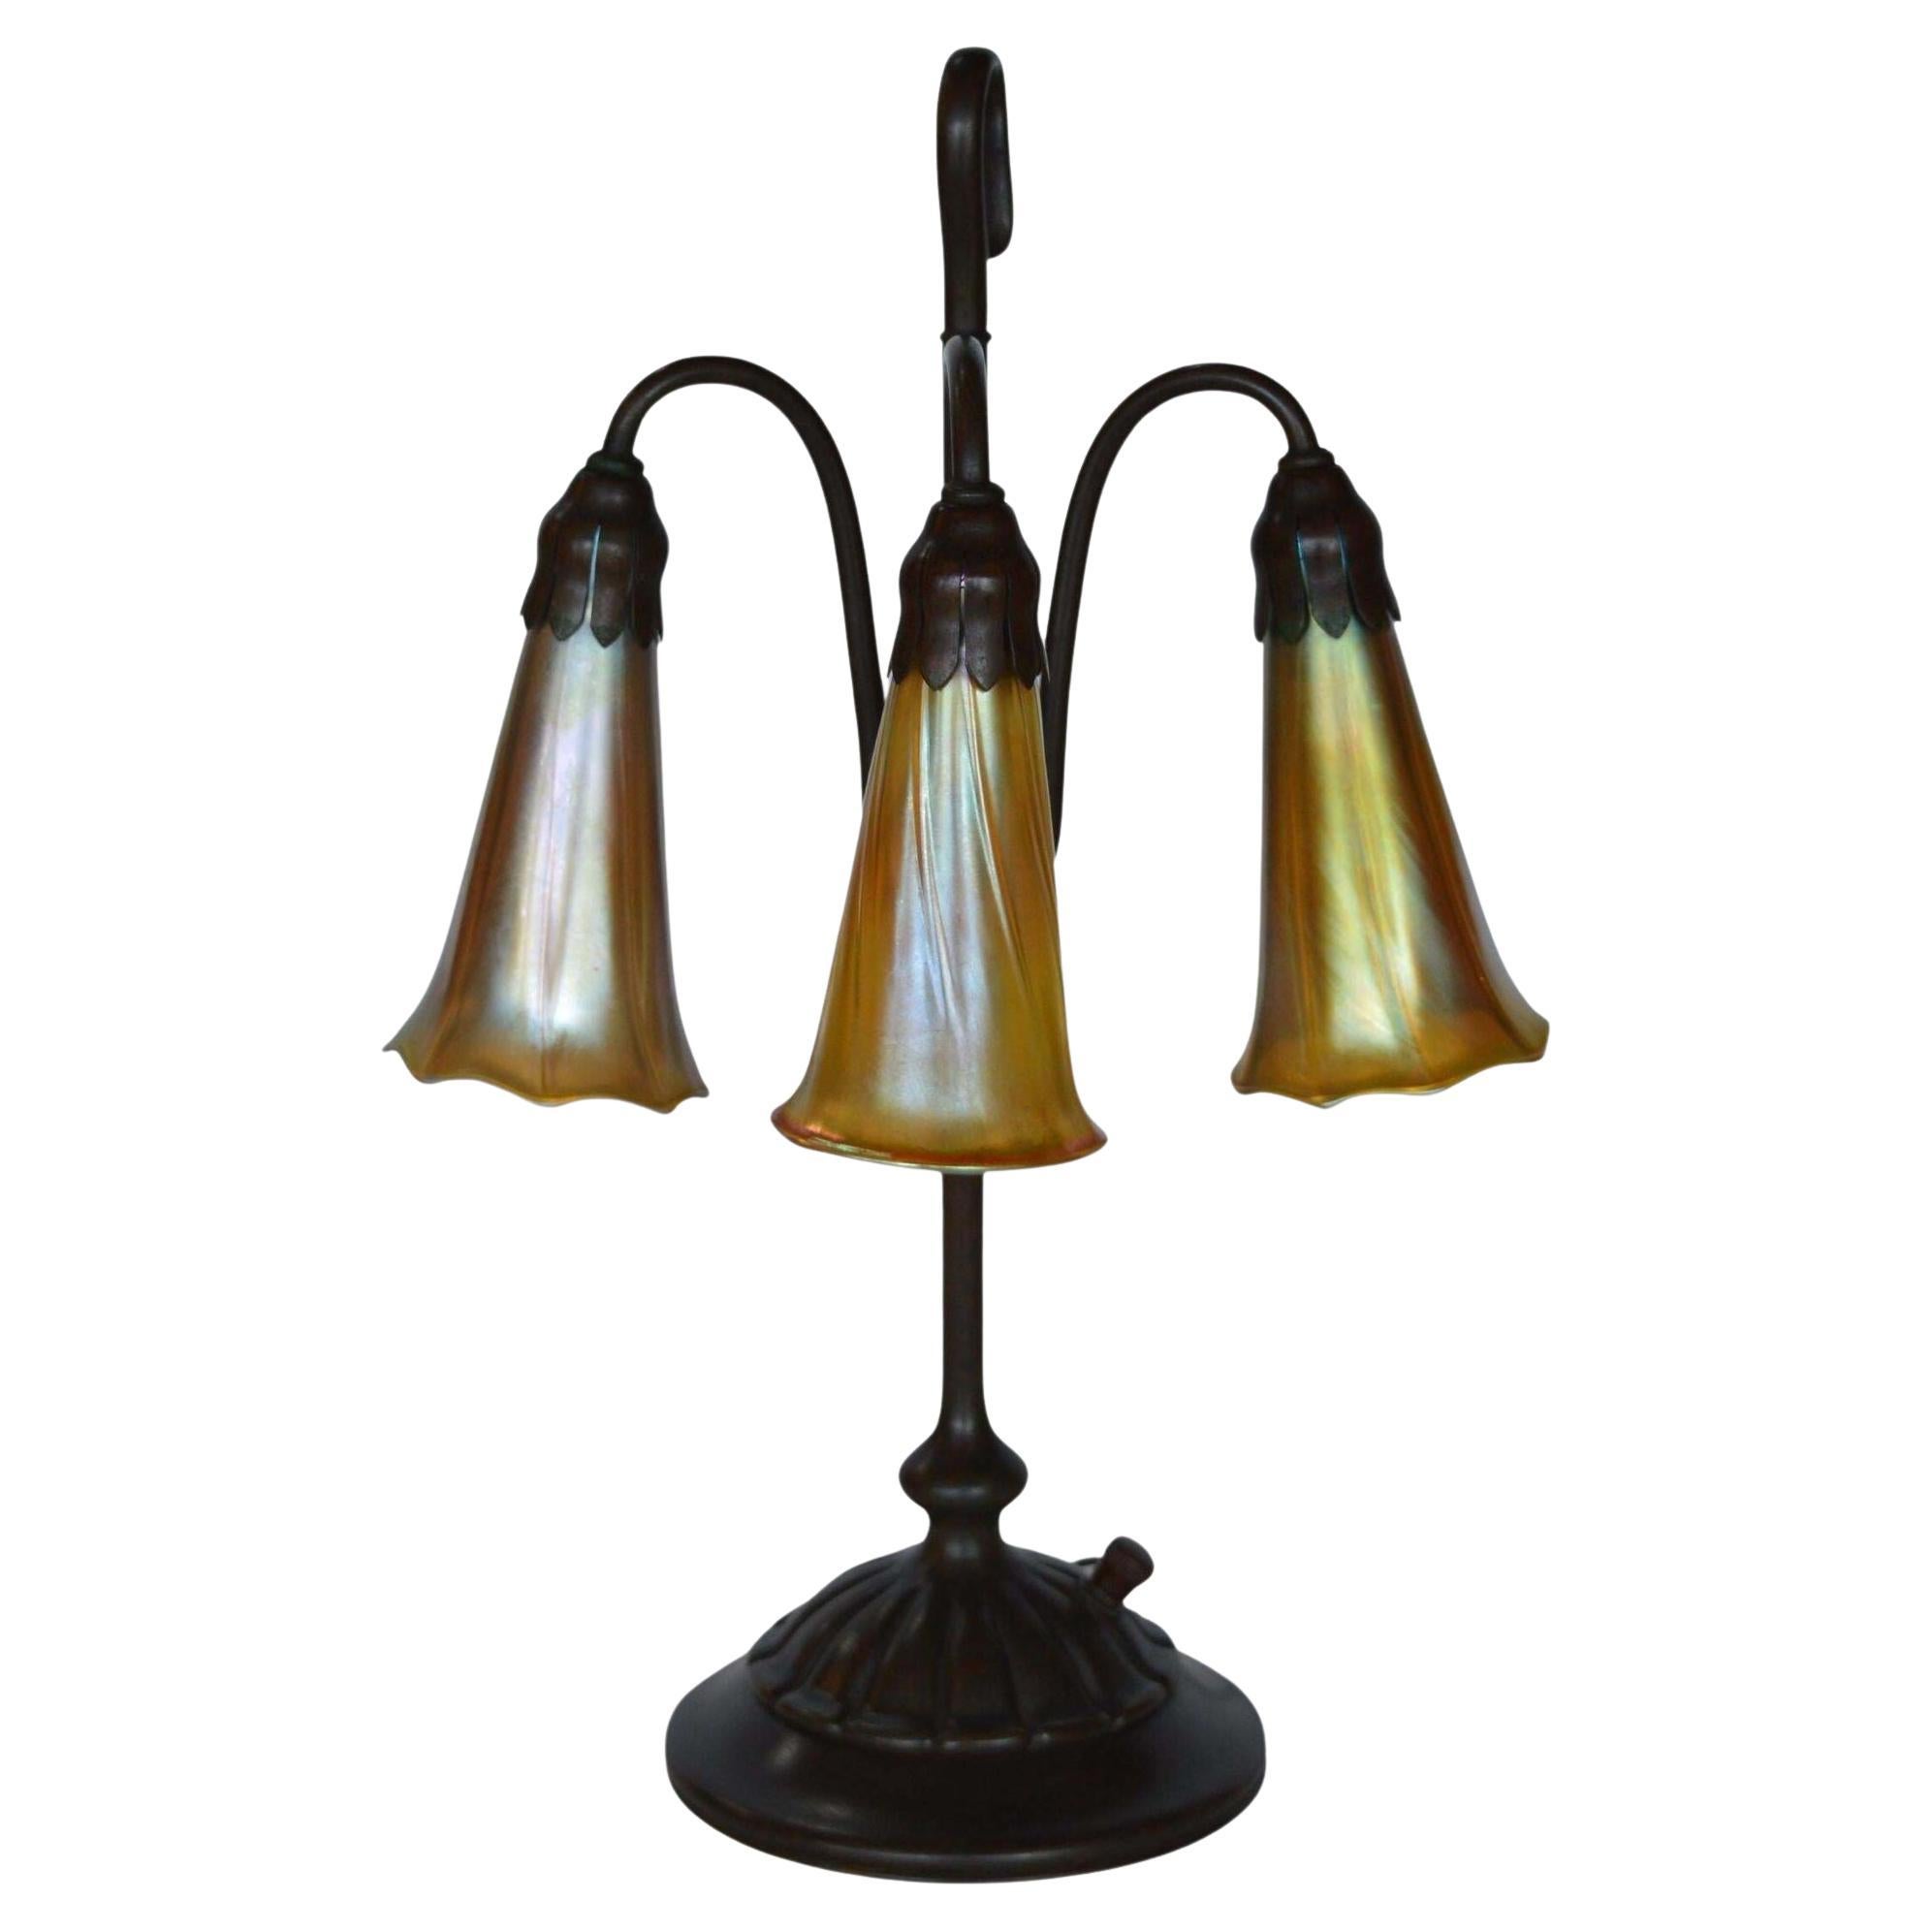 Tiffany Studios Three Light Lily Bronze and Favrile Table Lamp